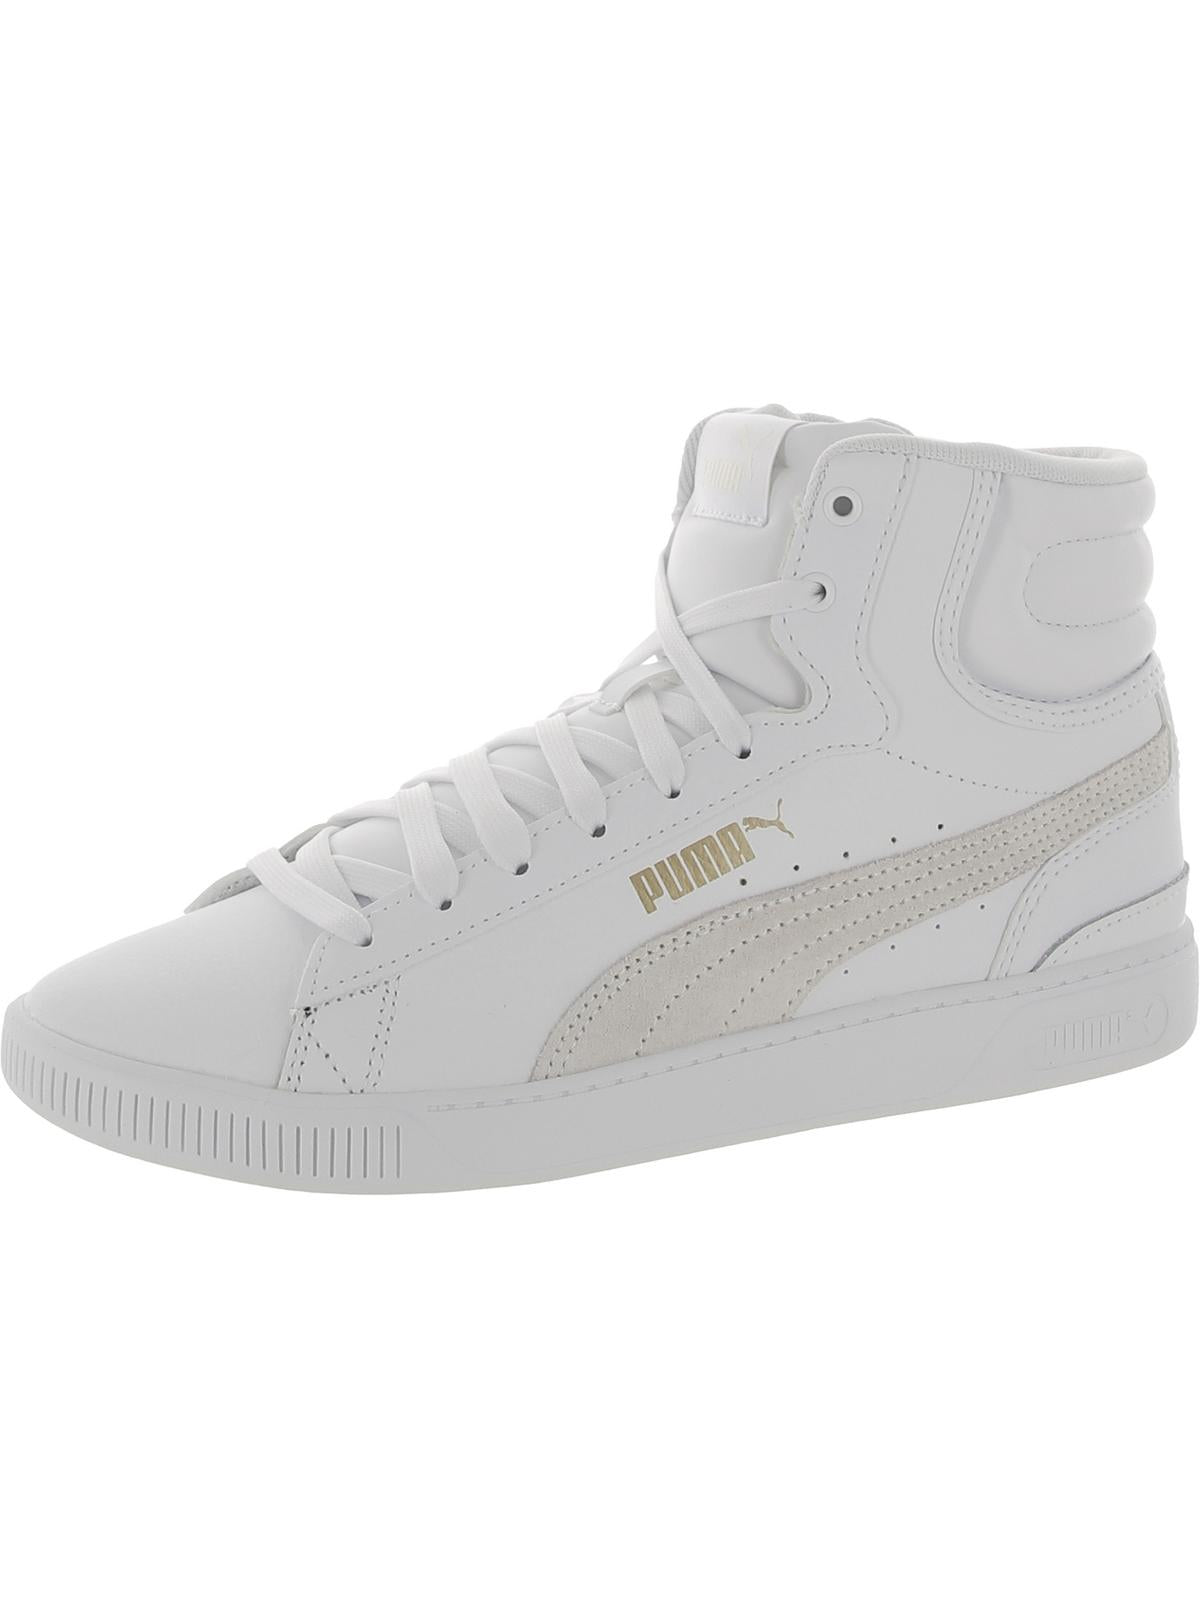 Shop Puma Vikky 3 Mid Womens Leather High-top Skate Shoes In Multi